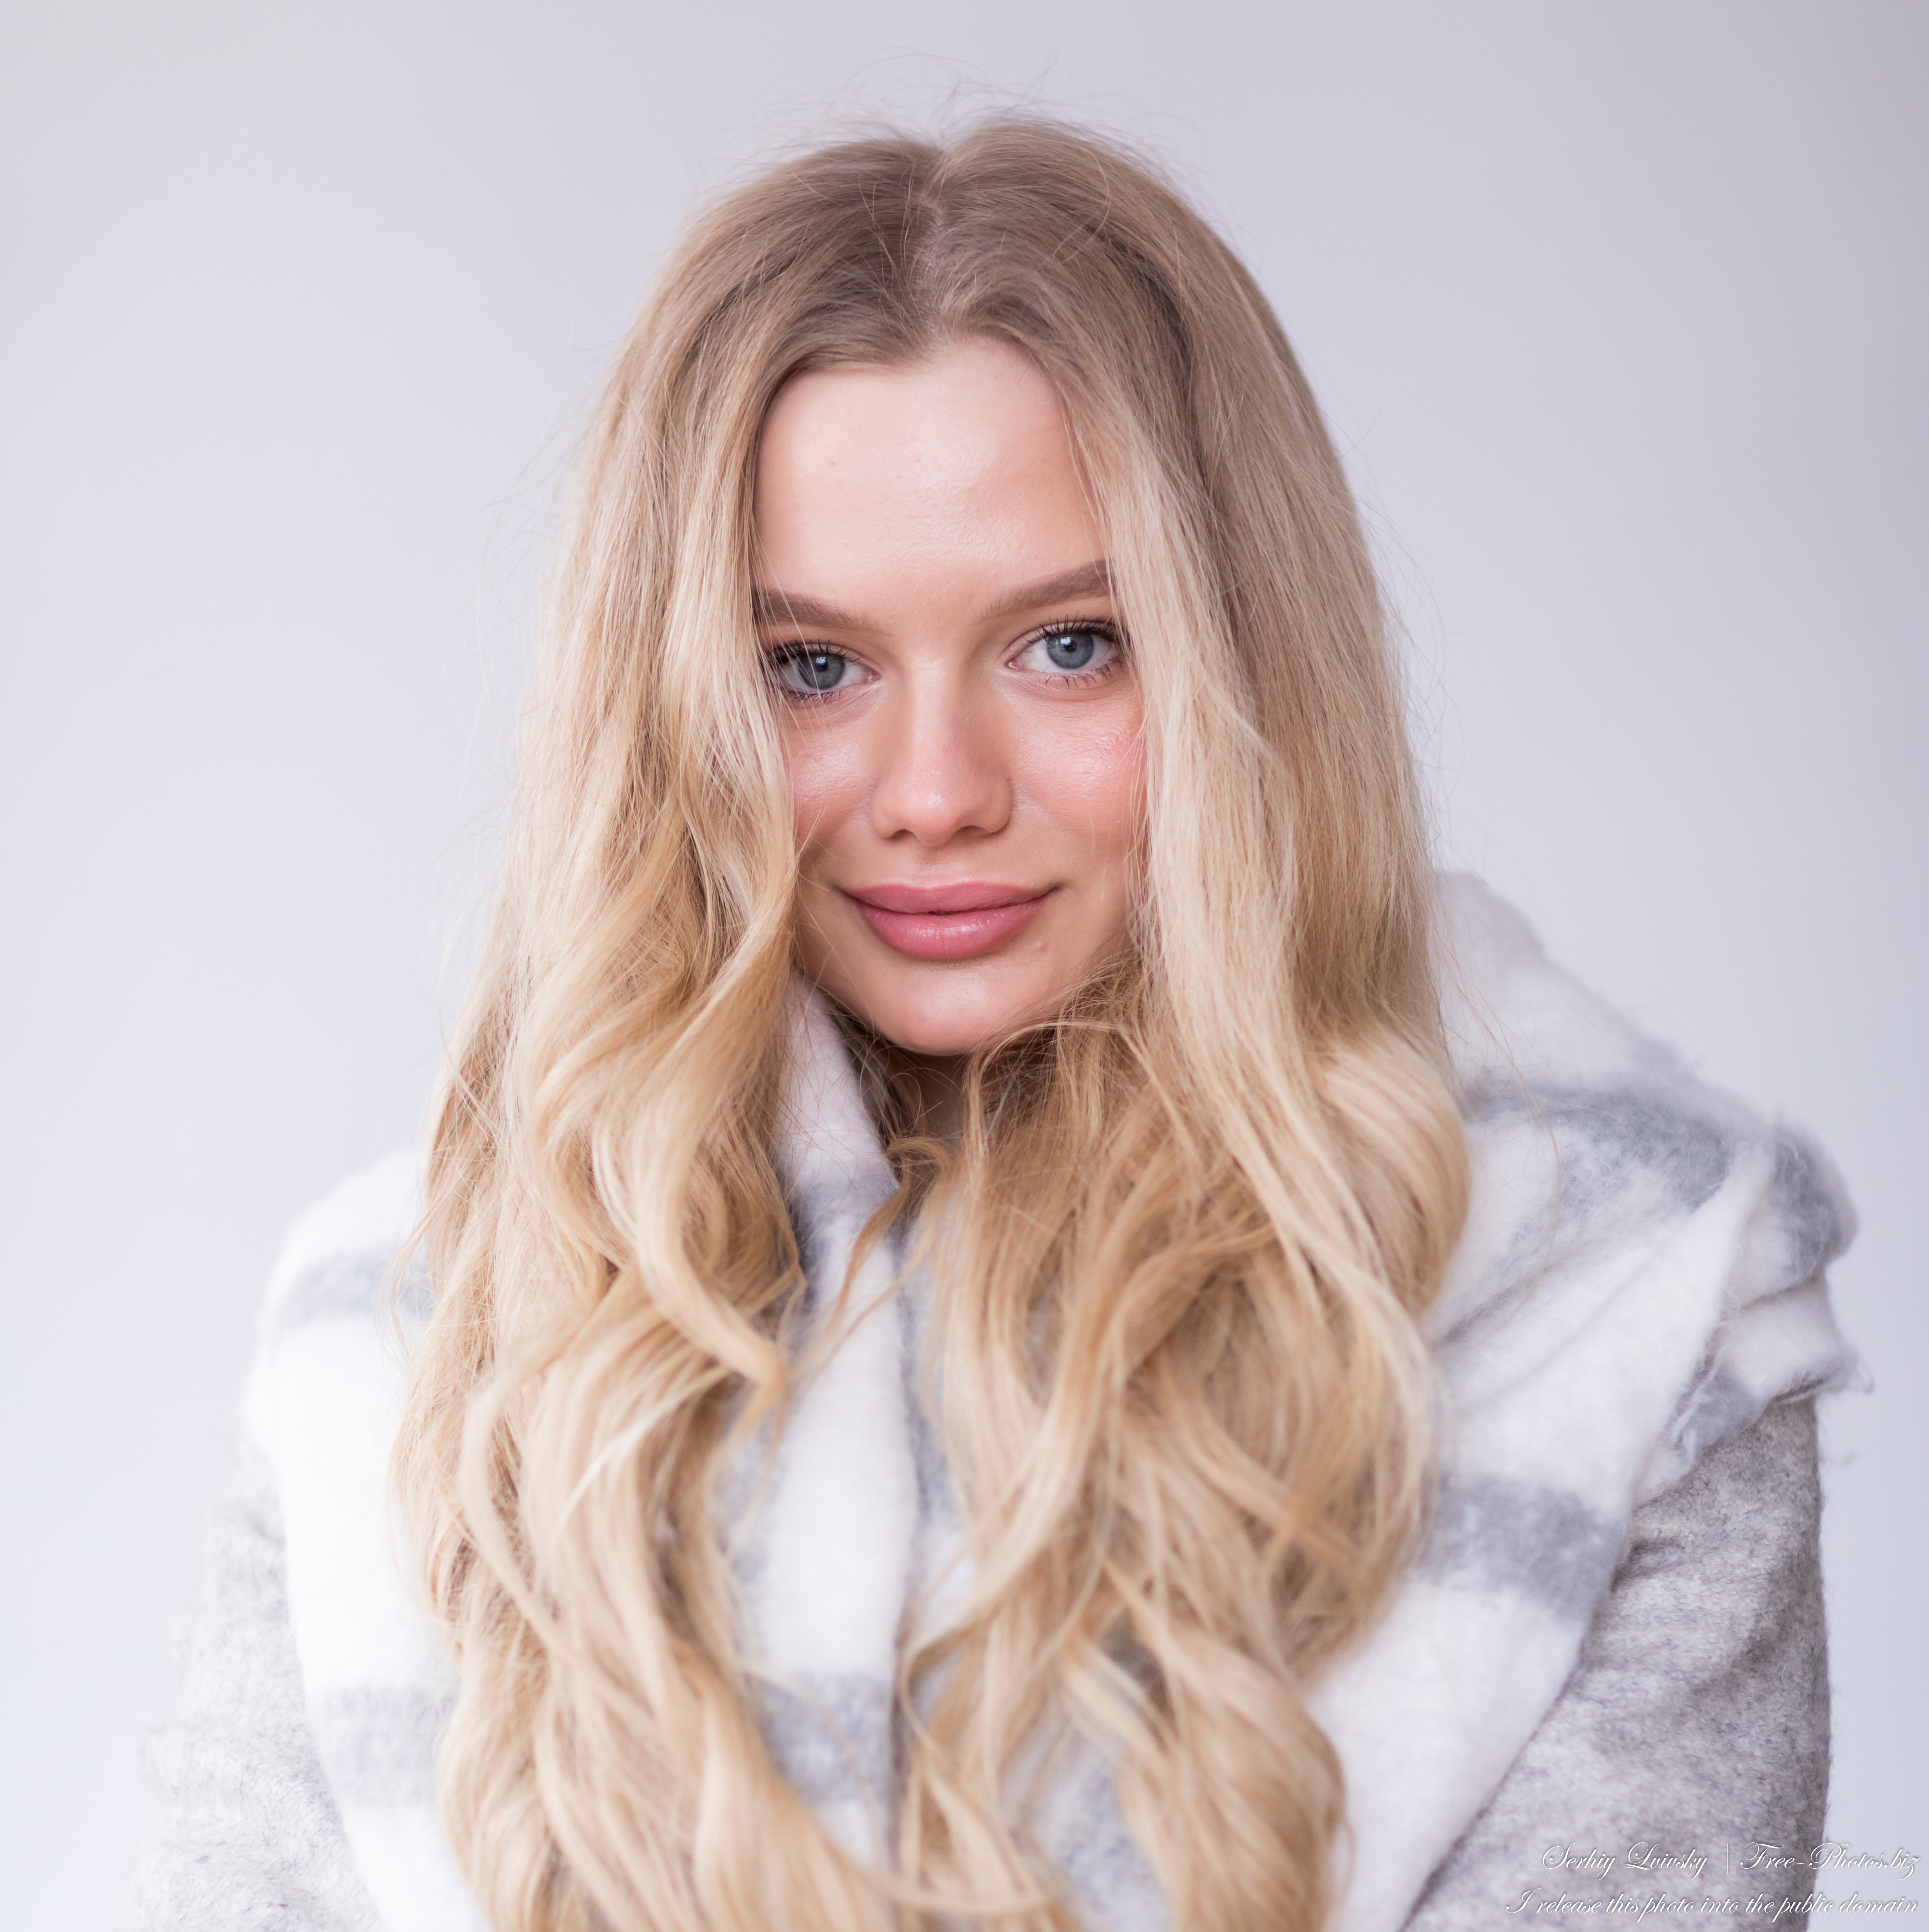 Oksana - a 19-year-old natural blonde girl photographed by Serhiy Lvivsky in March 2021, picture 4